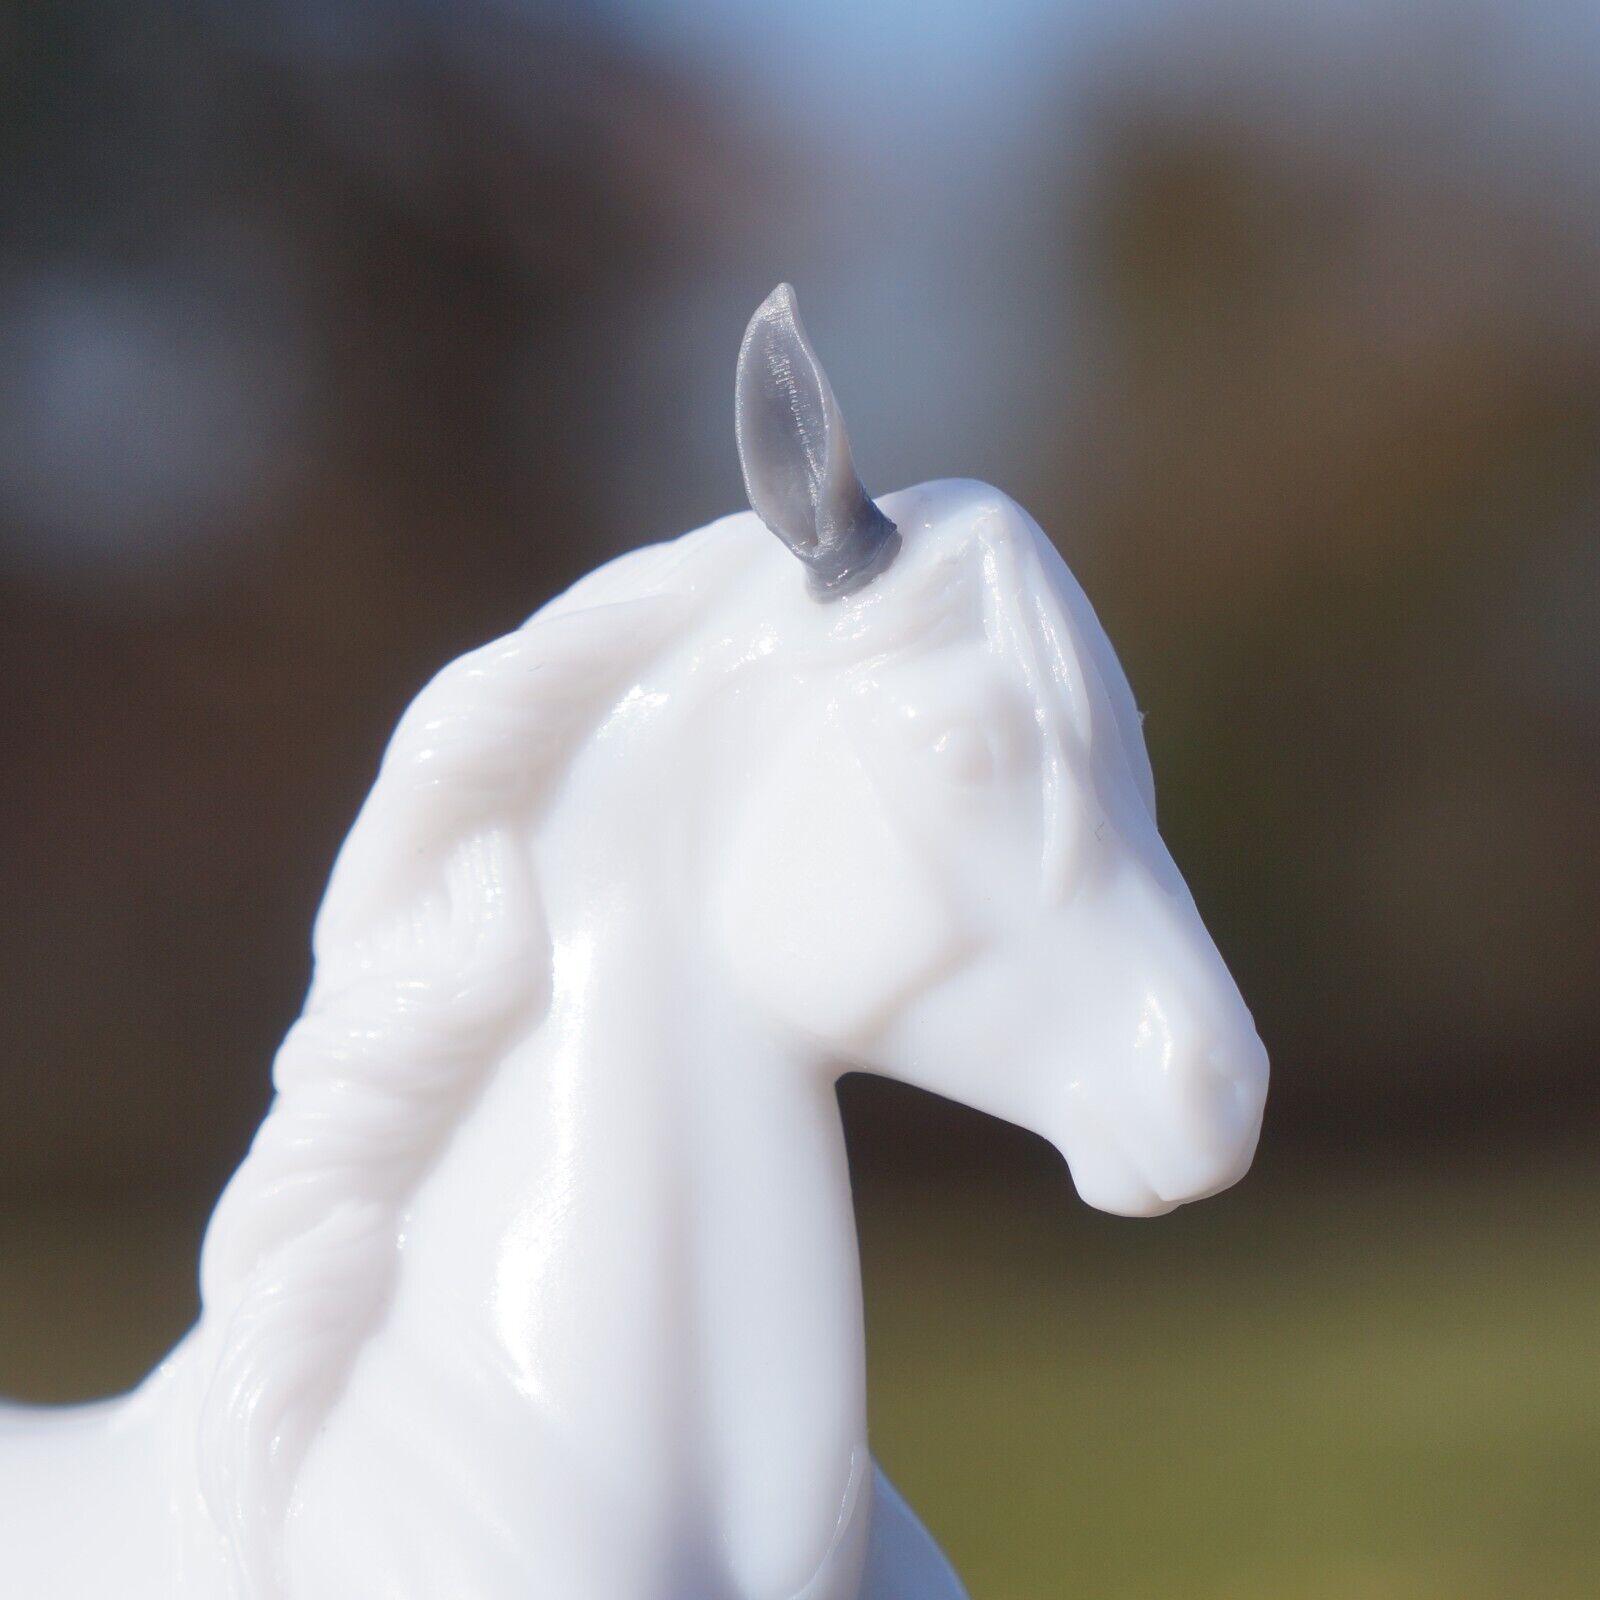 [5.5mm] 1:32 Scale 3D Printed Stablemate Horse Ears for Customizing + Sculpting